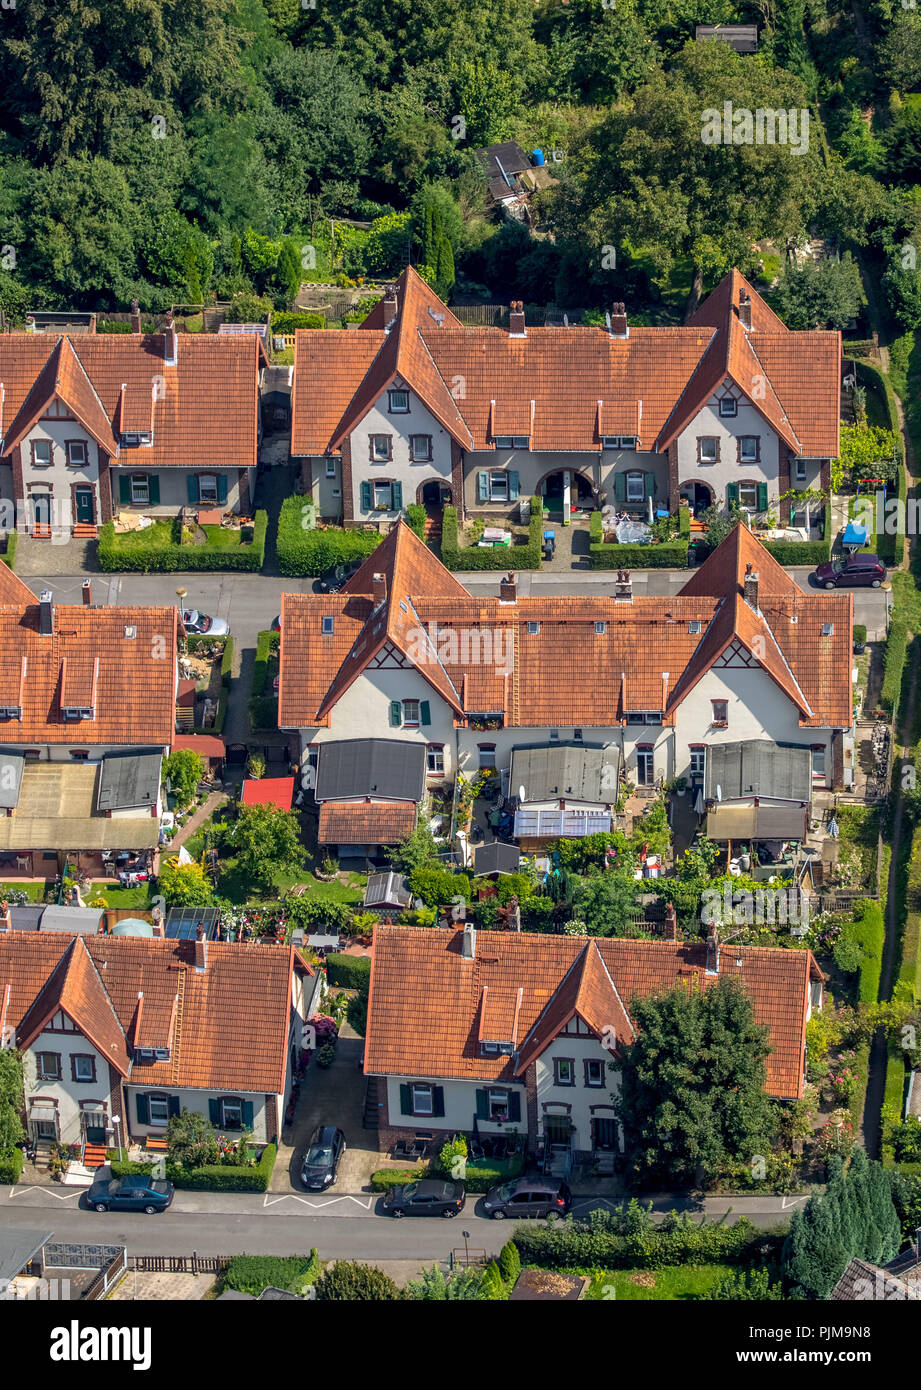 Müsendrei, workers' settlement with 24 semi-detached houses for the workers of the Henrichshütte, brick facades, plaster facades, Hattingen, Ruhr area, North Rhine-Westphalia, Germany Stock Photo